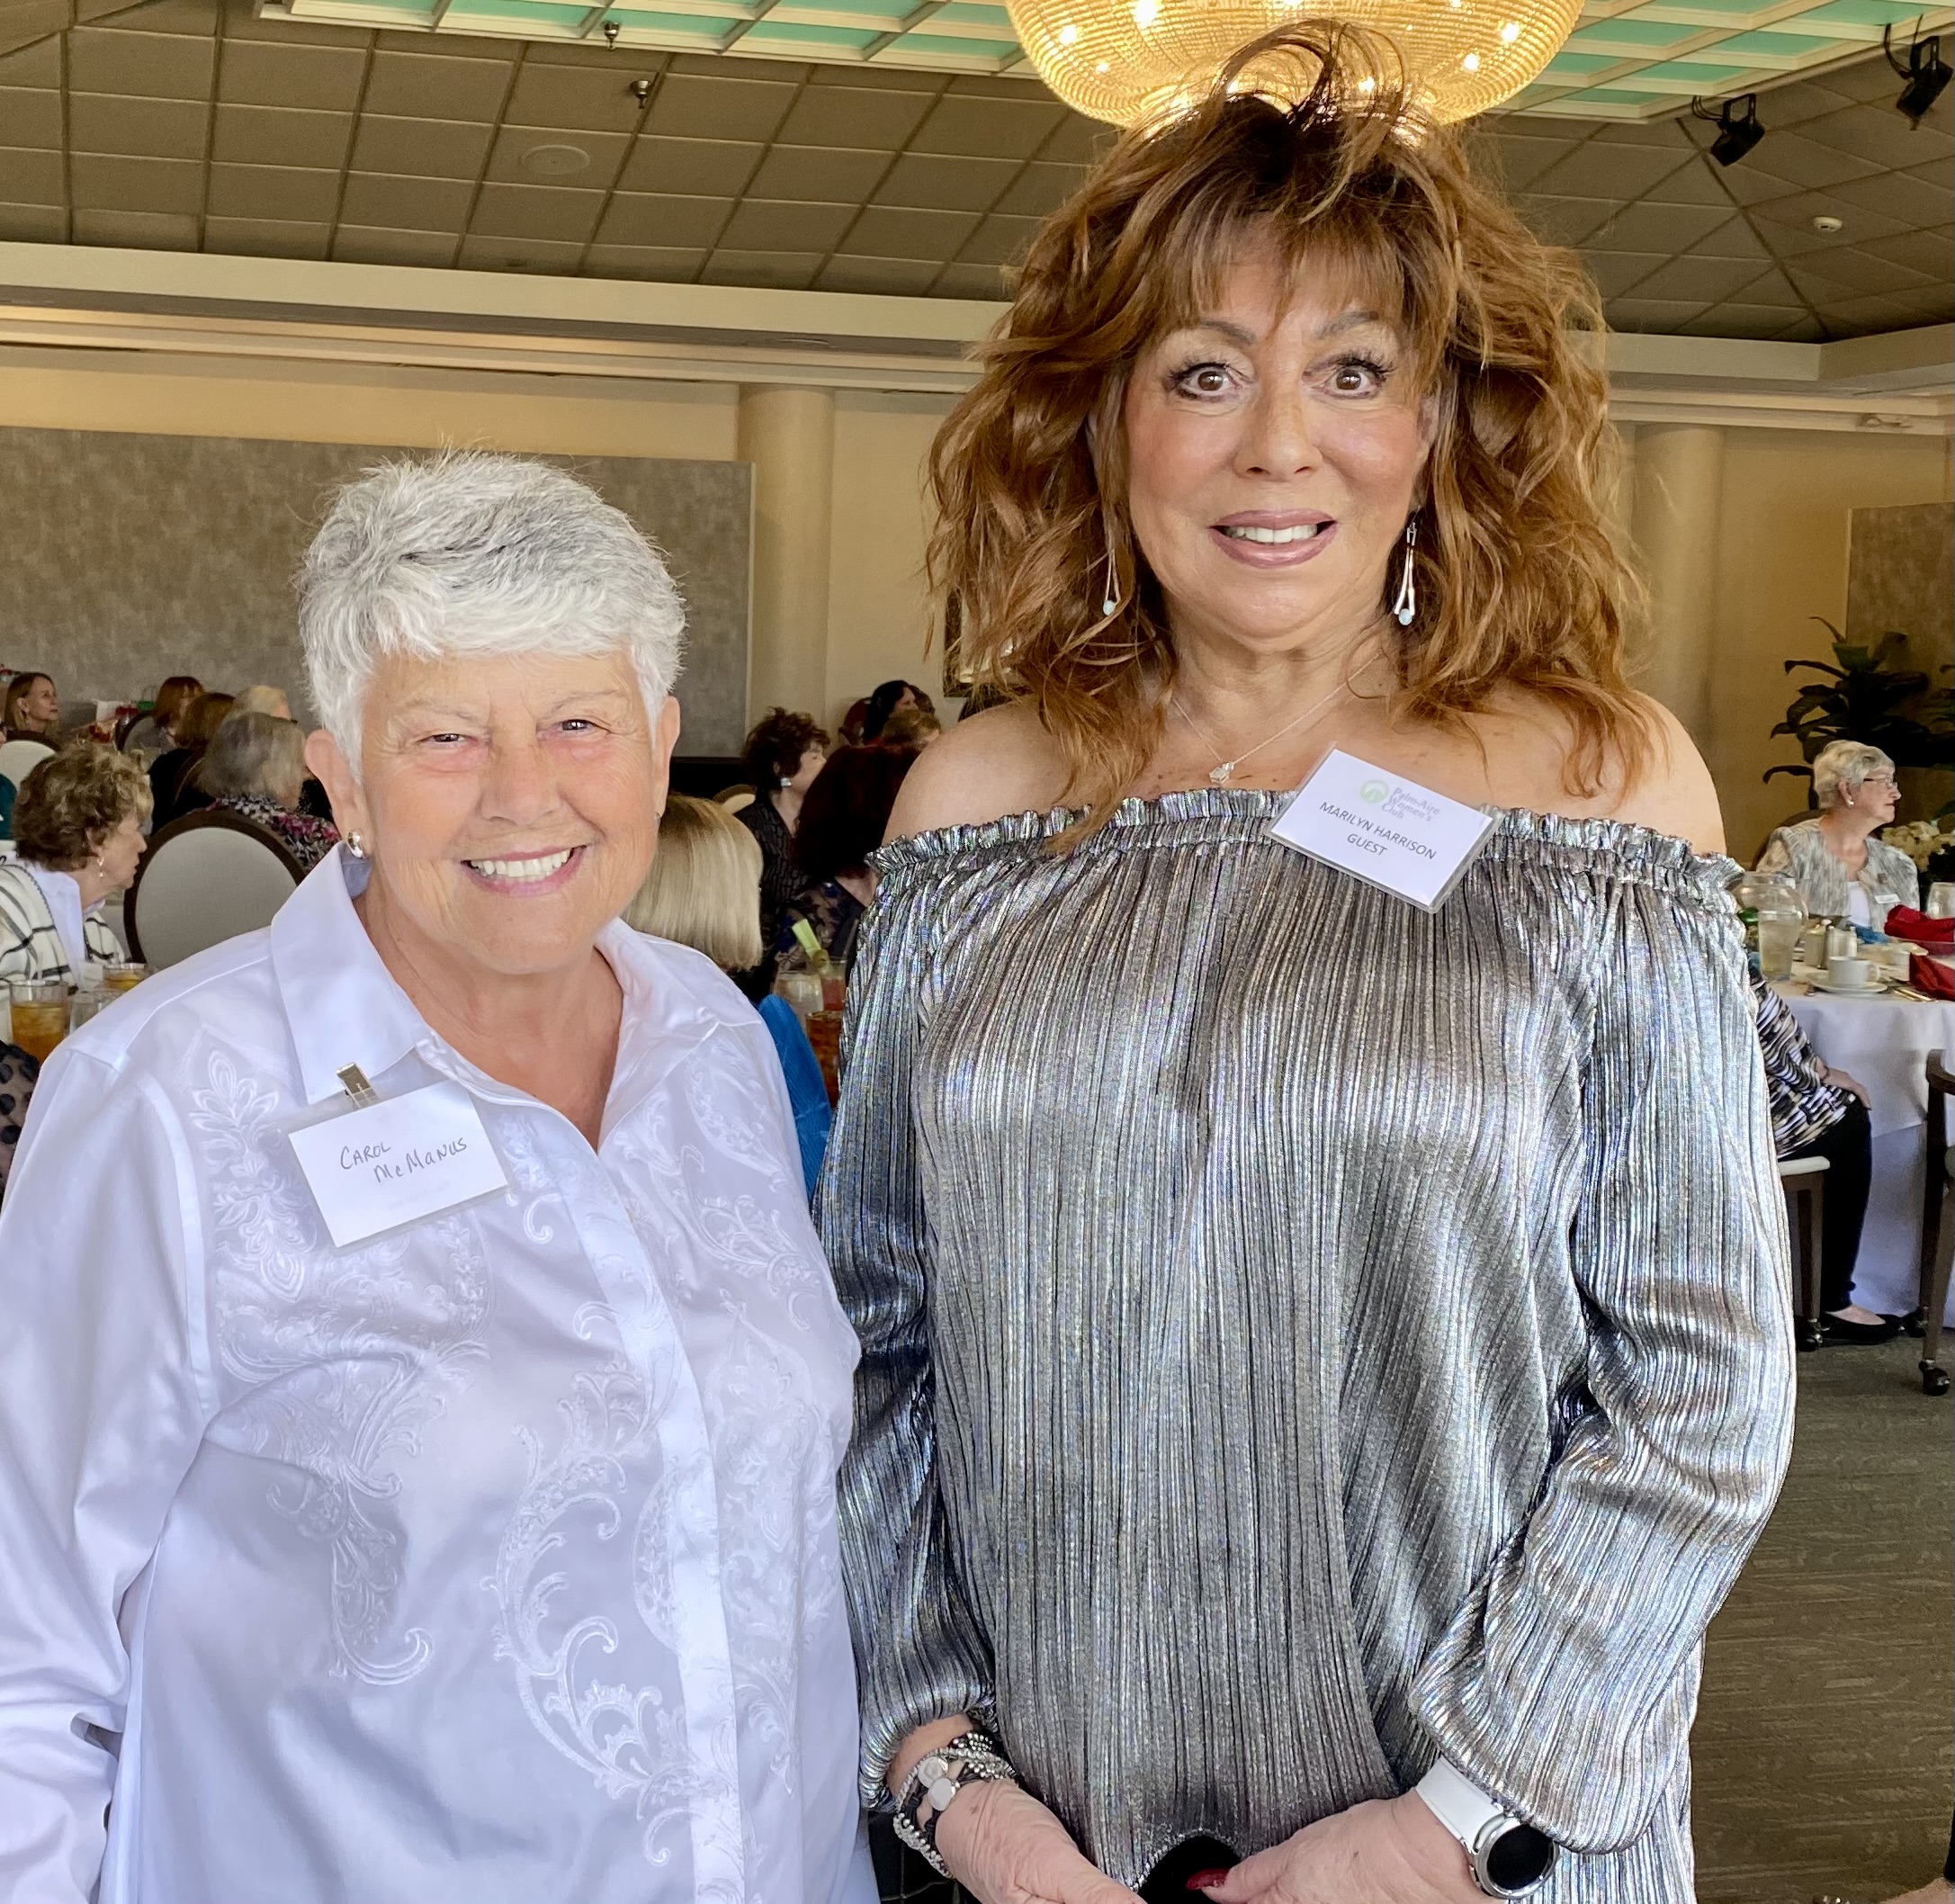 Carol McManus and Marilyn became PAWC members at the latest luncheon.